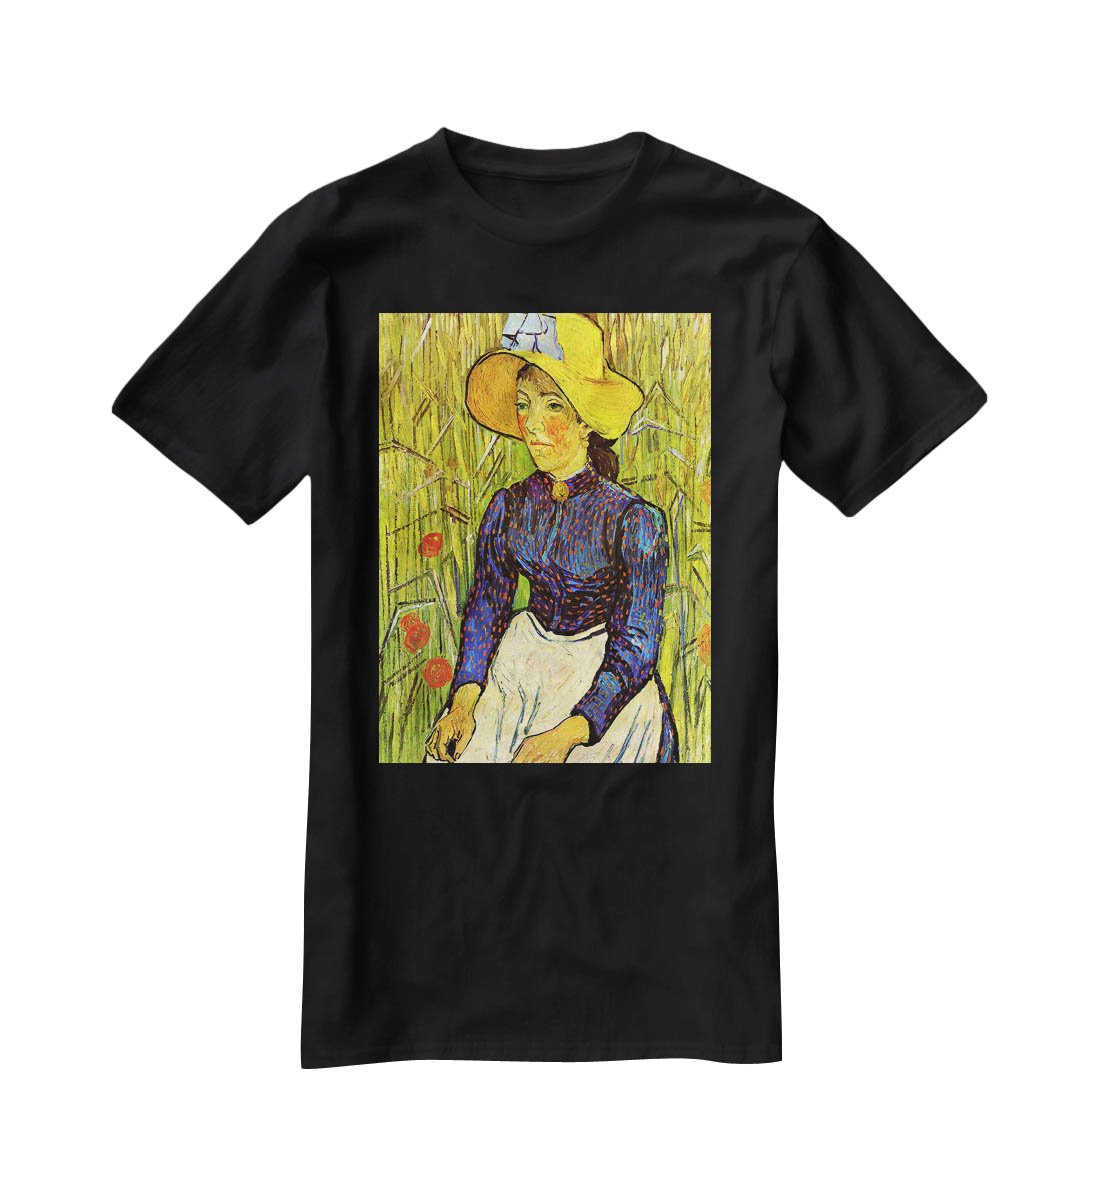 Young Peasant Woman with Straw Hat Sitting in the Wheat by Van Gogh T-Shirt - Canvas Art Rocks - 1